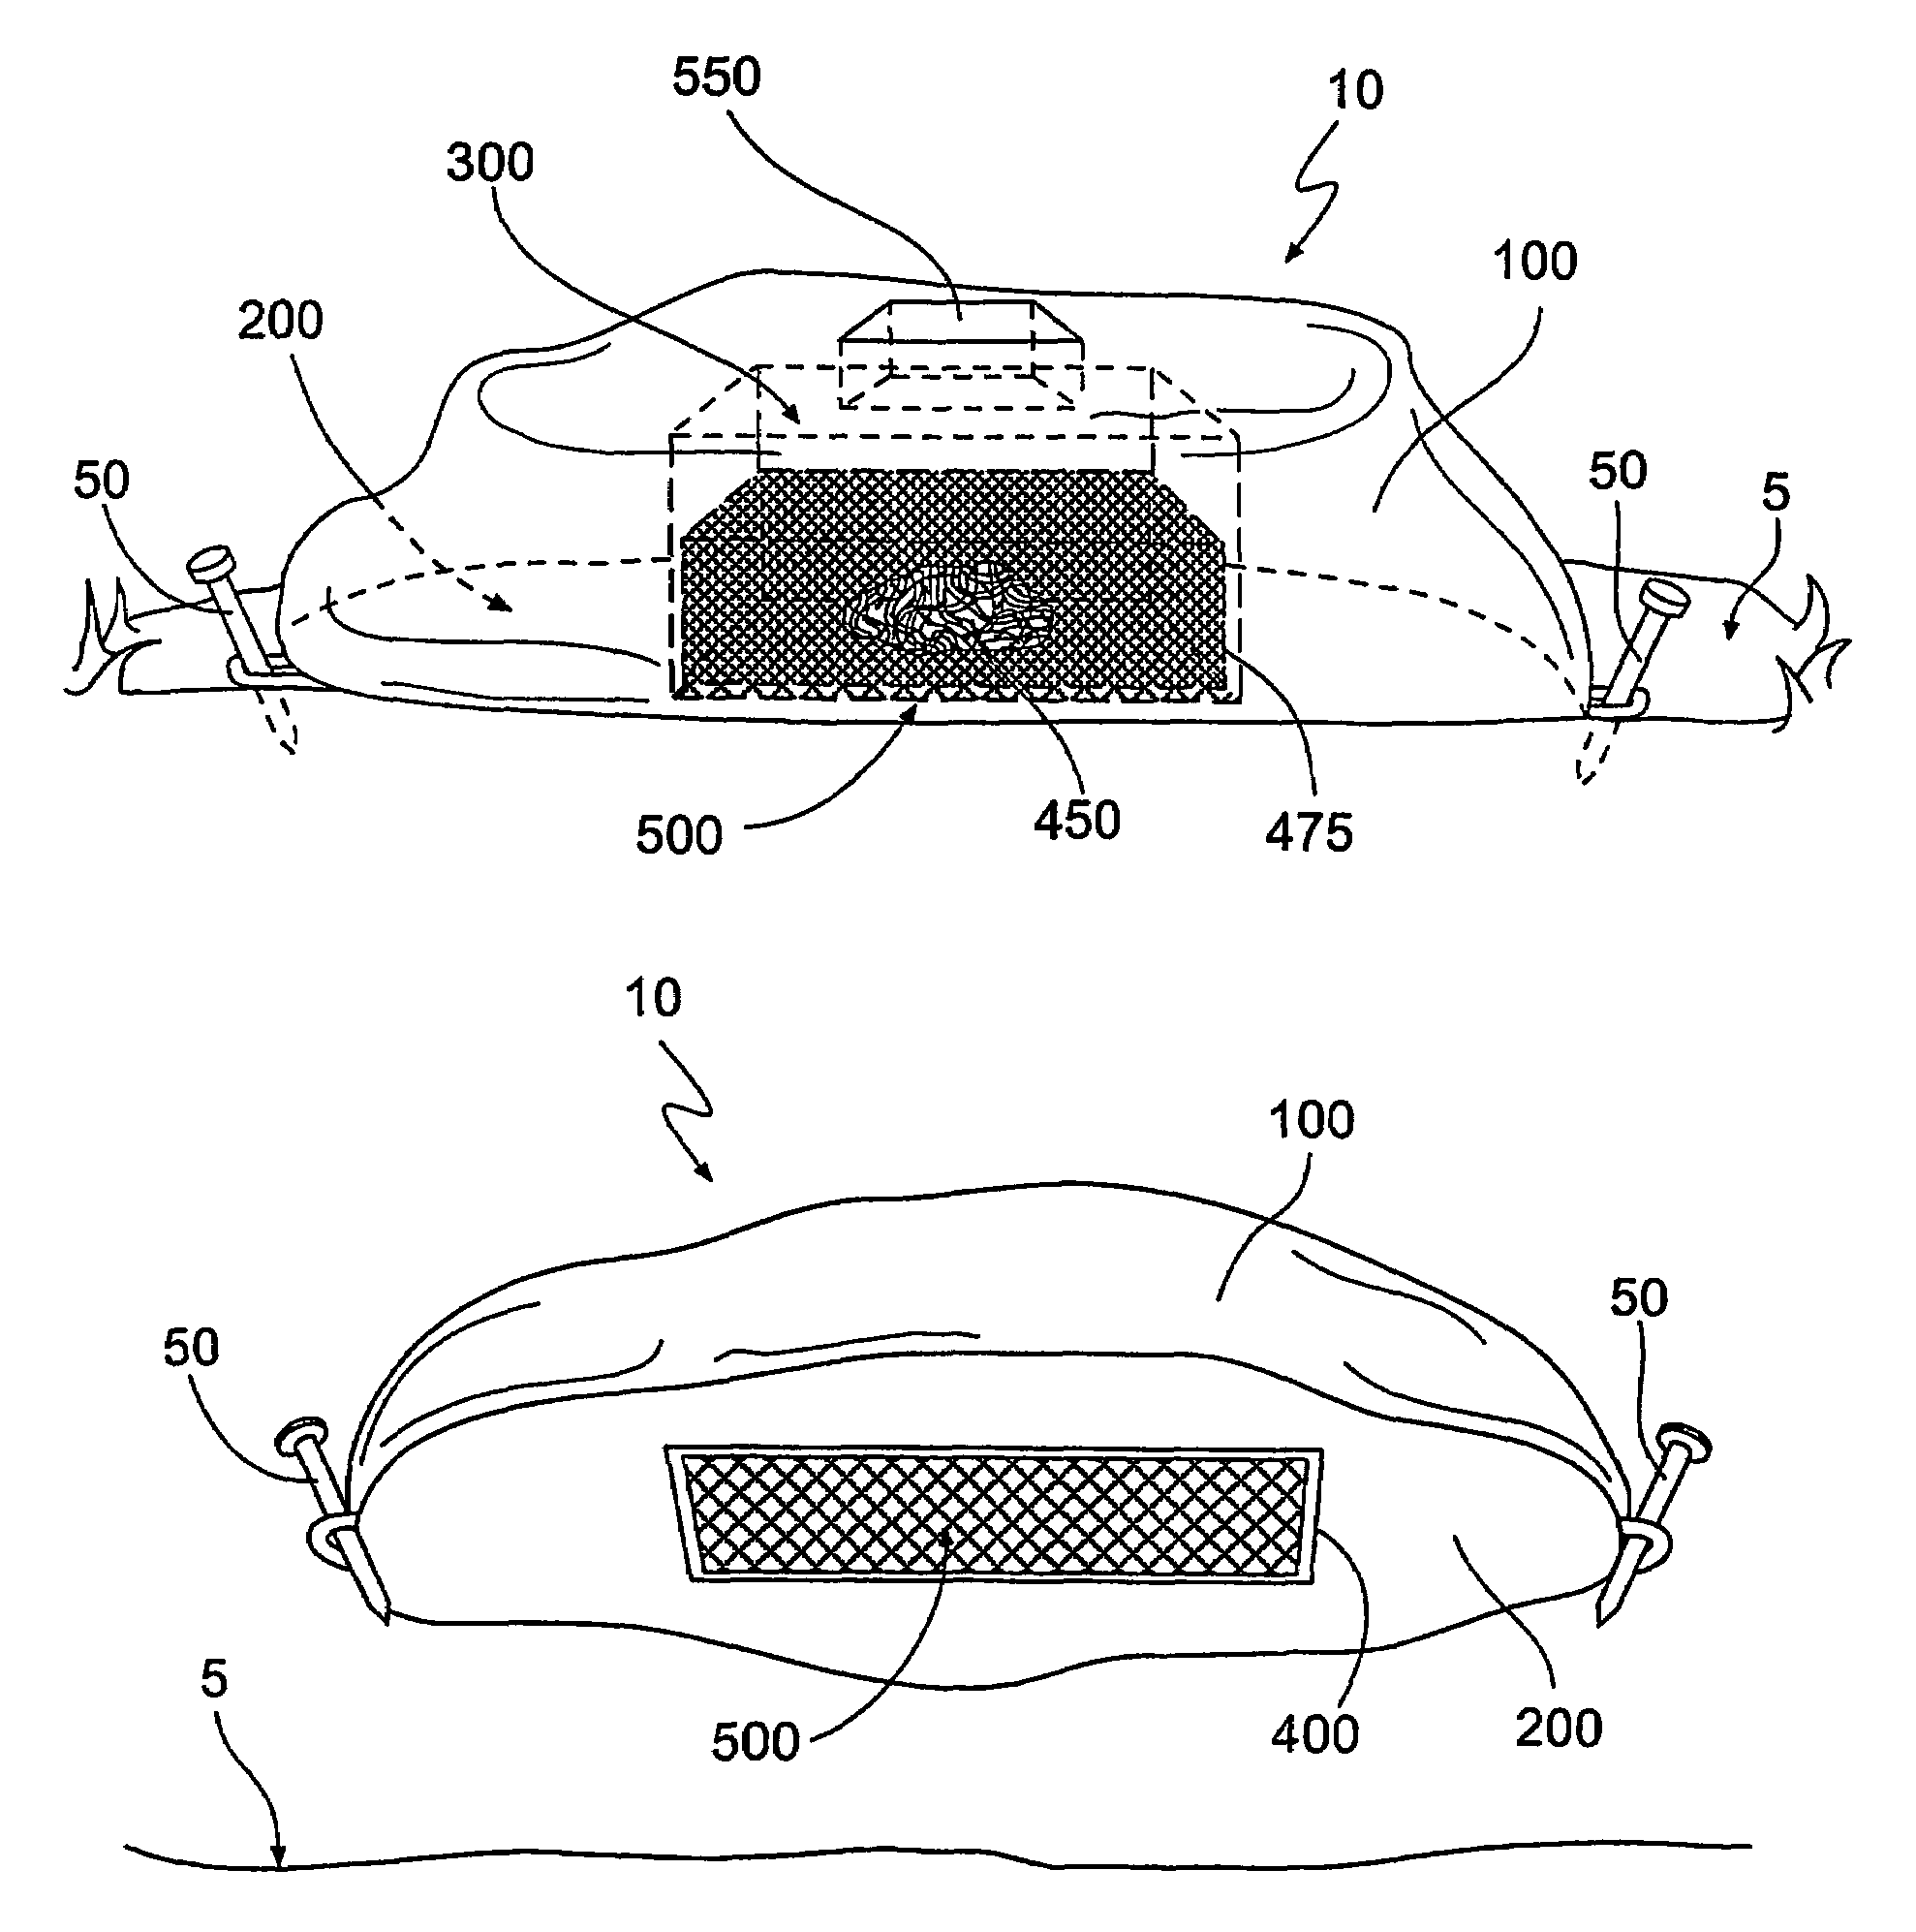 Termite-monitoring device and associated method